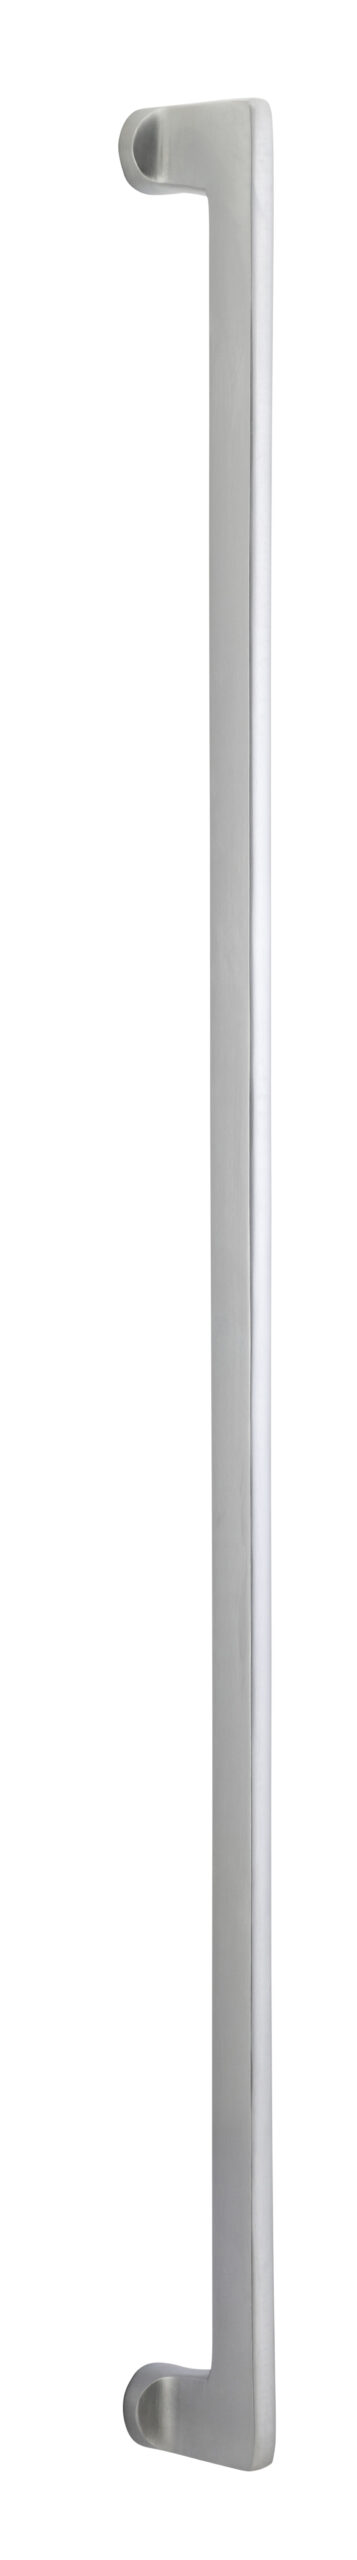 21315 - Baltimore Pull Handle - 900mm - Brushed Chrome